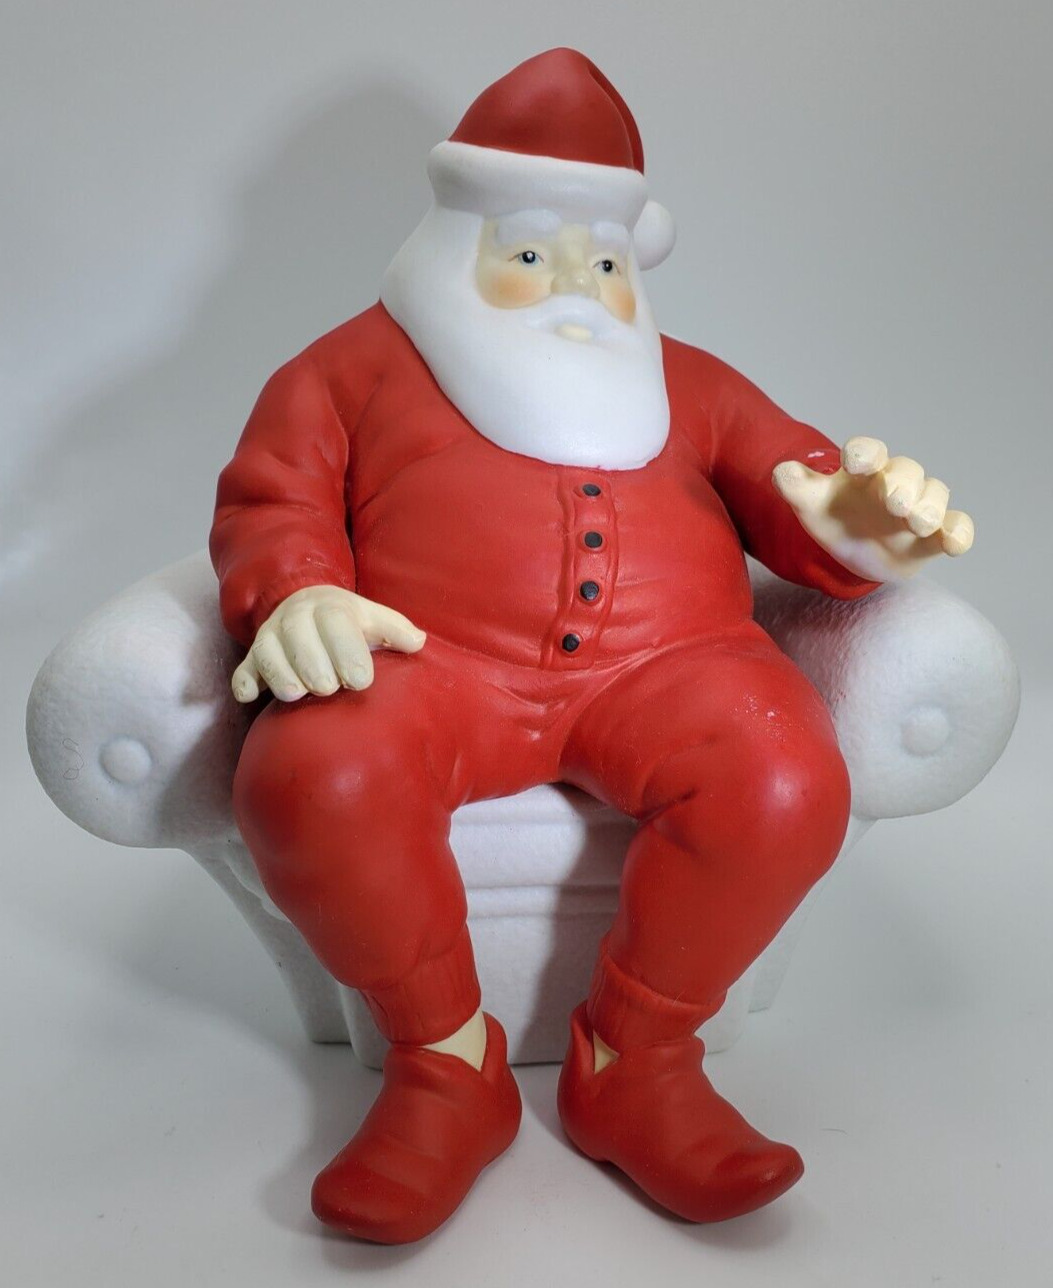 Dept. 56, Ceramic, Large Santa Relaxing in a Large Comfy Chair